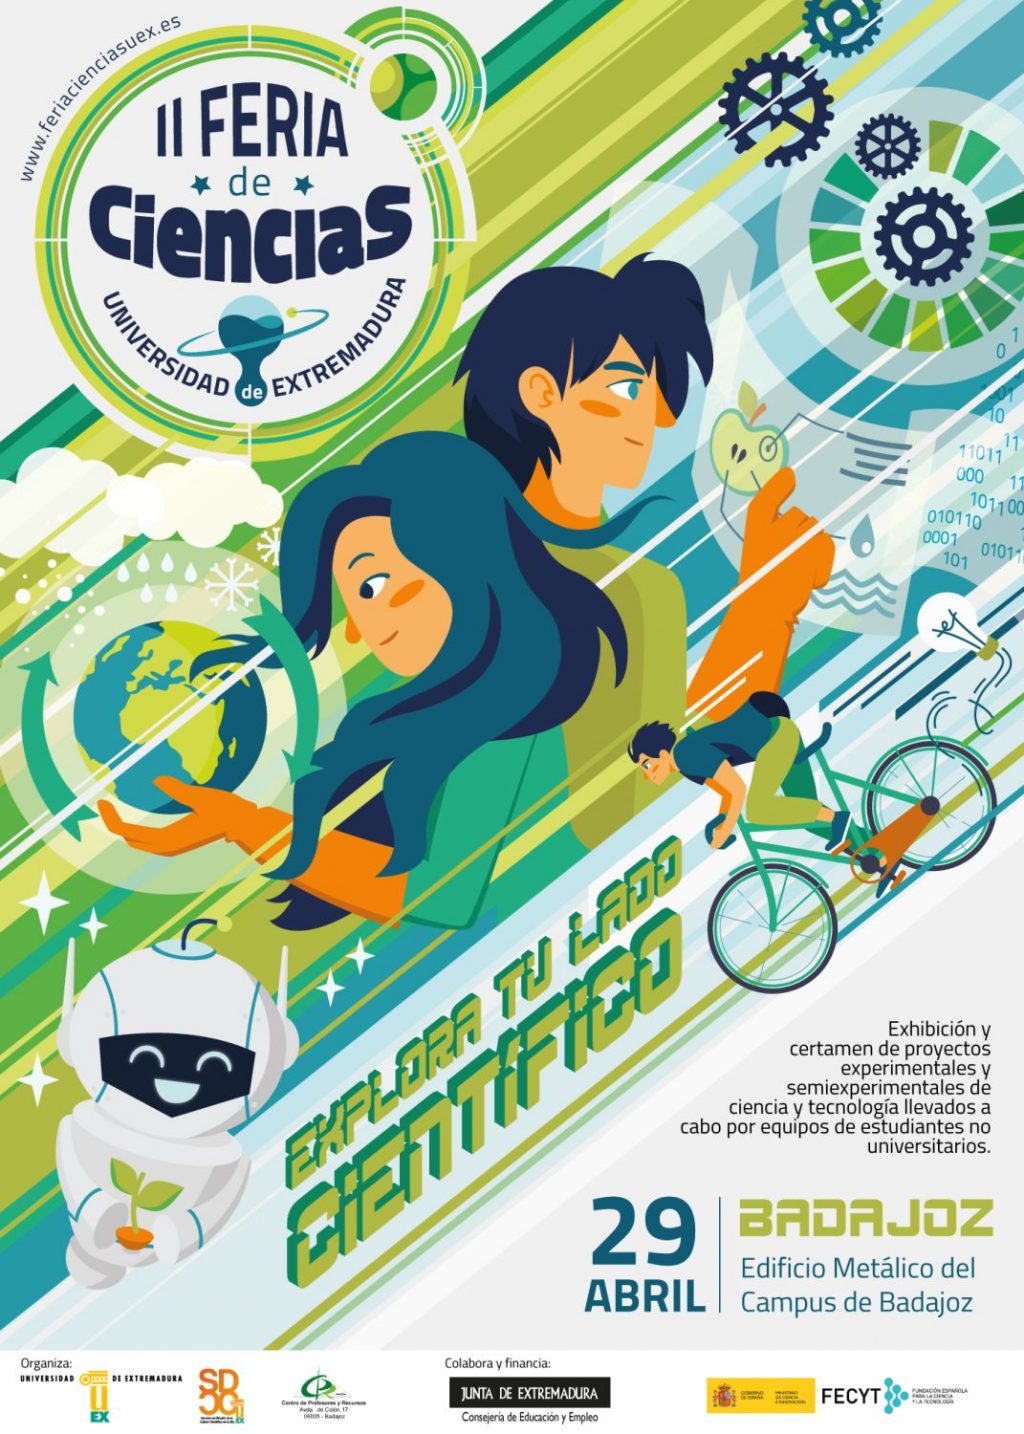 Open the invitation to participate in the second science fair of the University of Extremadura